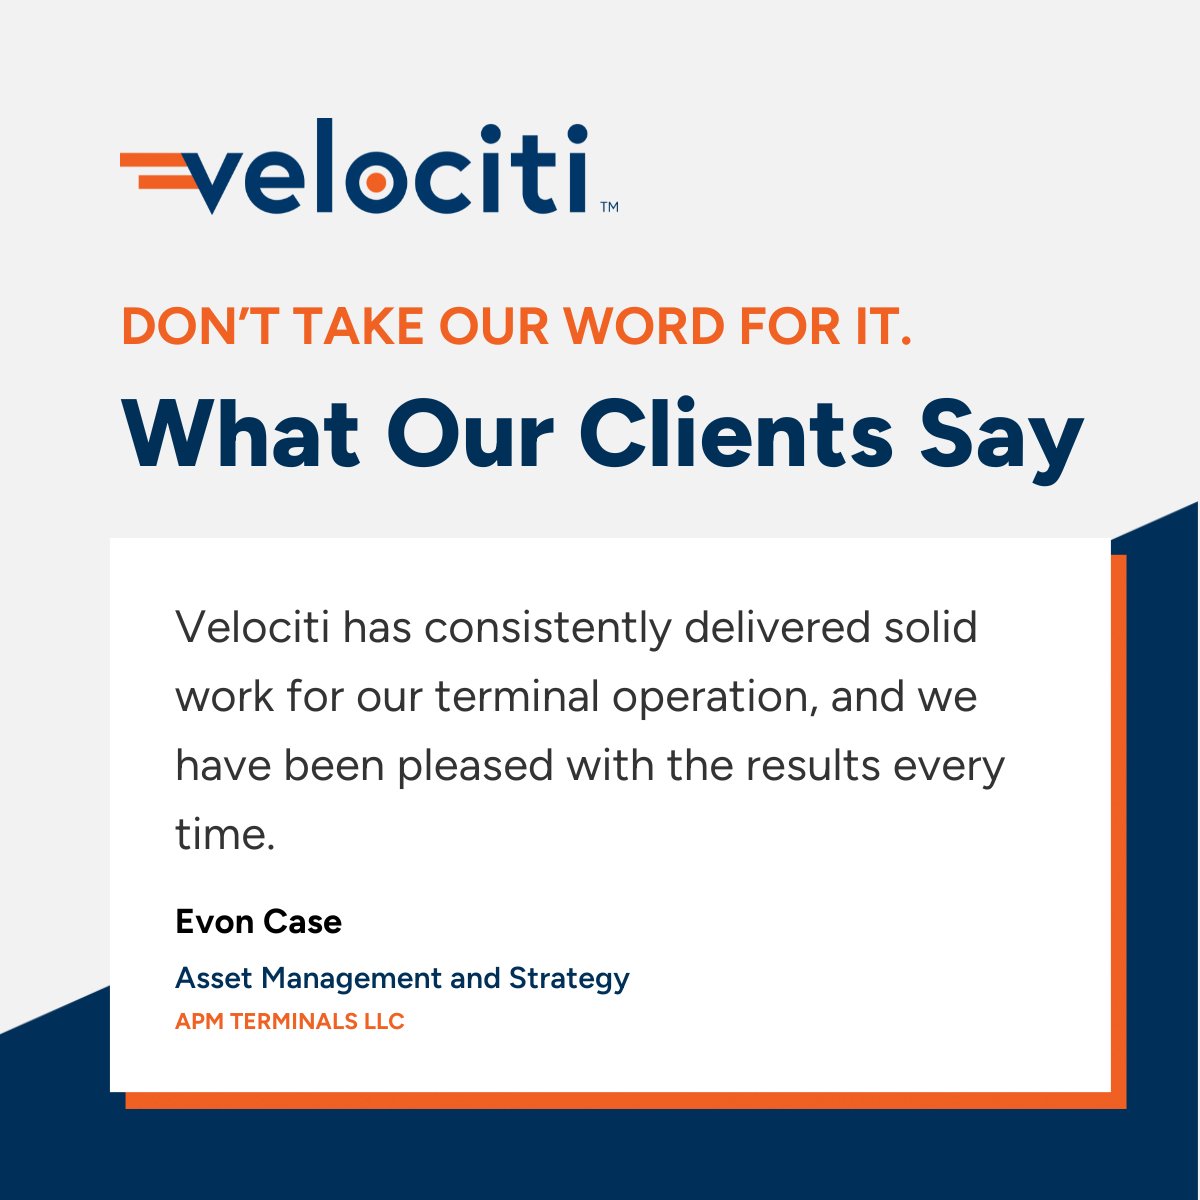 Our goal is to analyze your servicing and maintenance plans and work with you to enhance the experience of employees, clients and visitors of your facilities.
Discover Velociti Services for yourself, velocitiservices.com/contact/
#FacilityServices #FacilityManagement #VelocitiServices